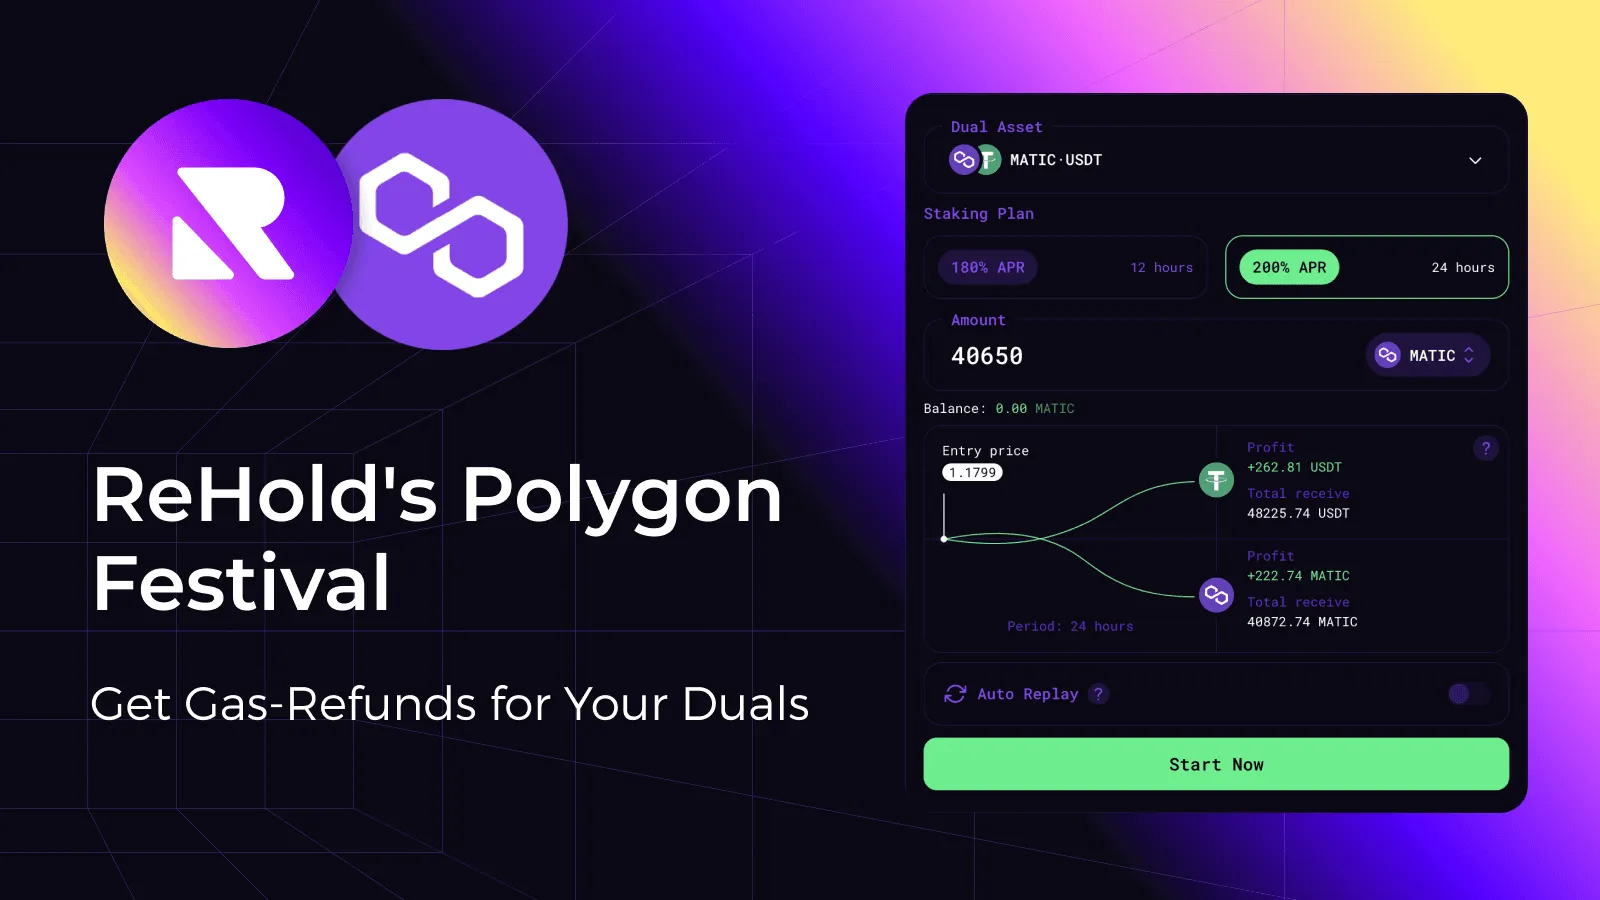 ReHold's Polygon Festival – Get Gas-Refunds for Your Duals